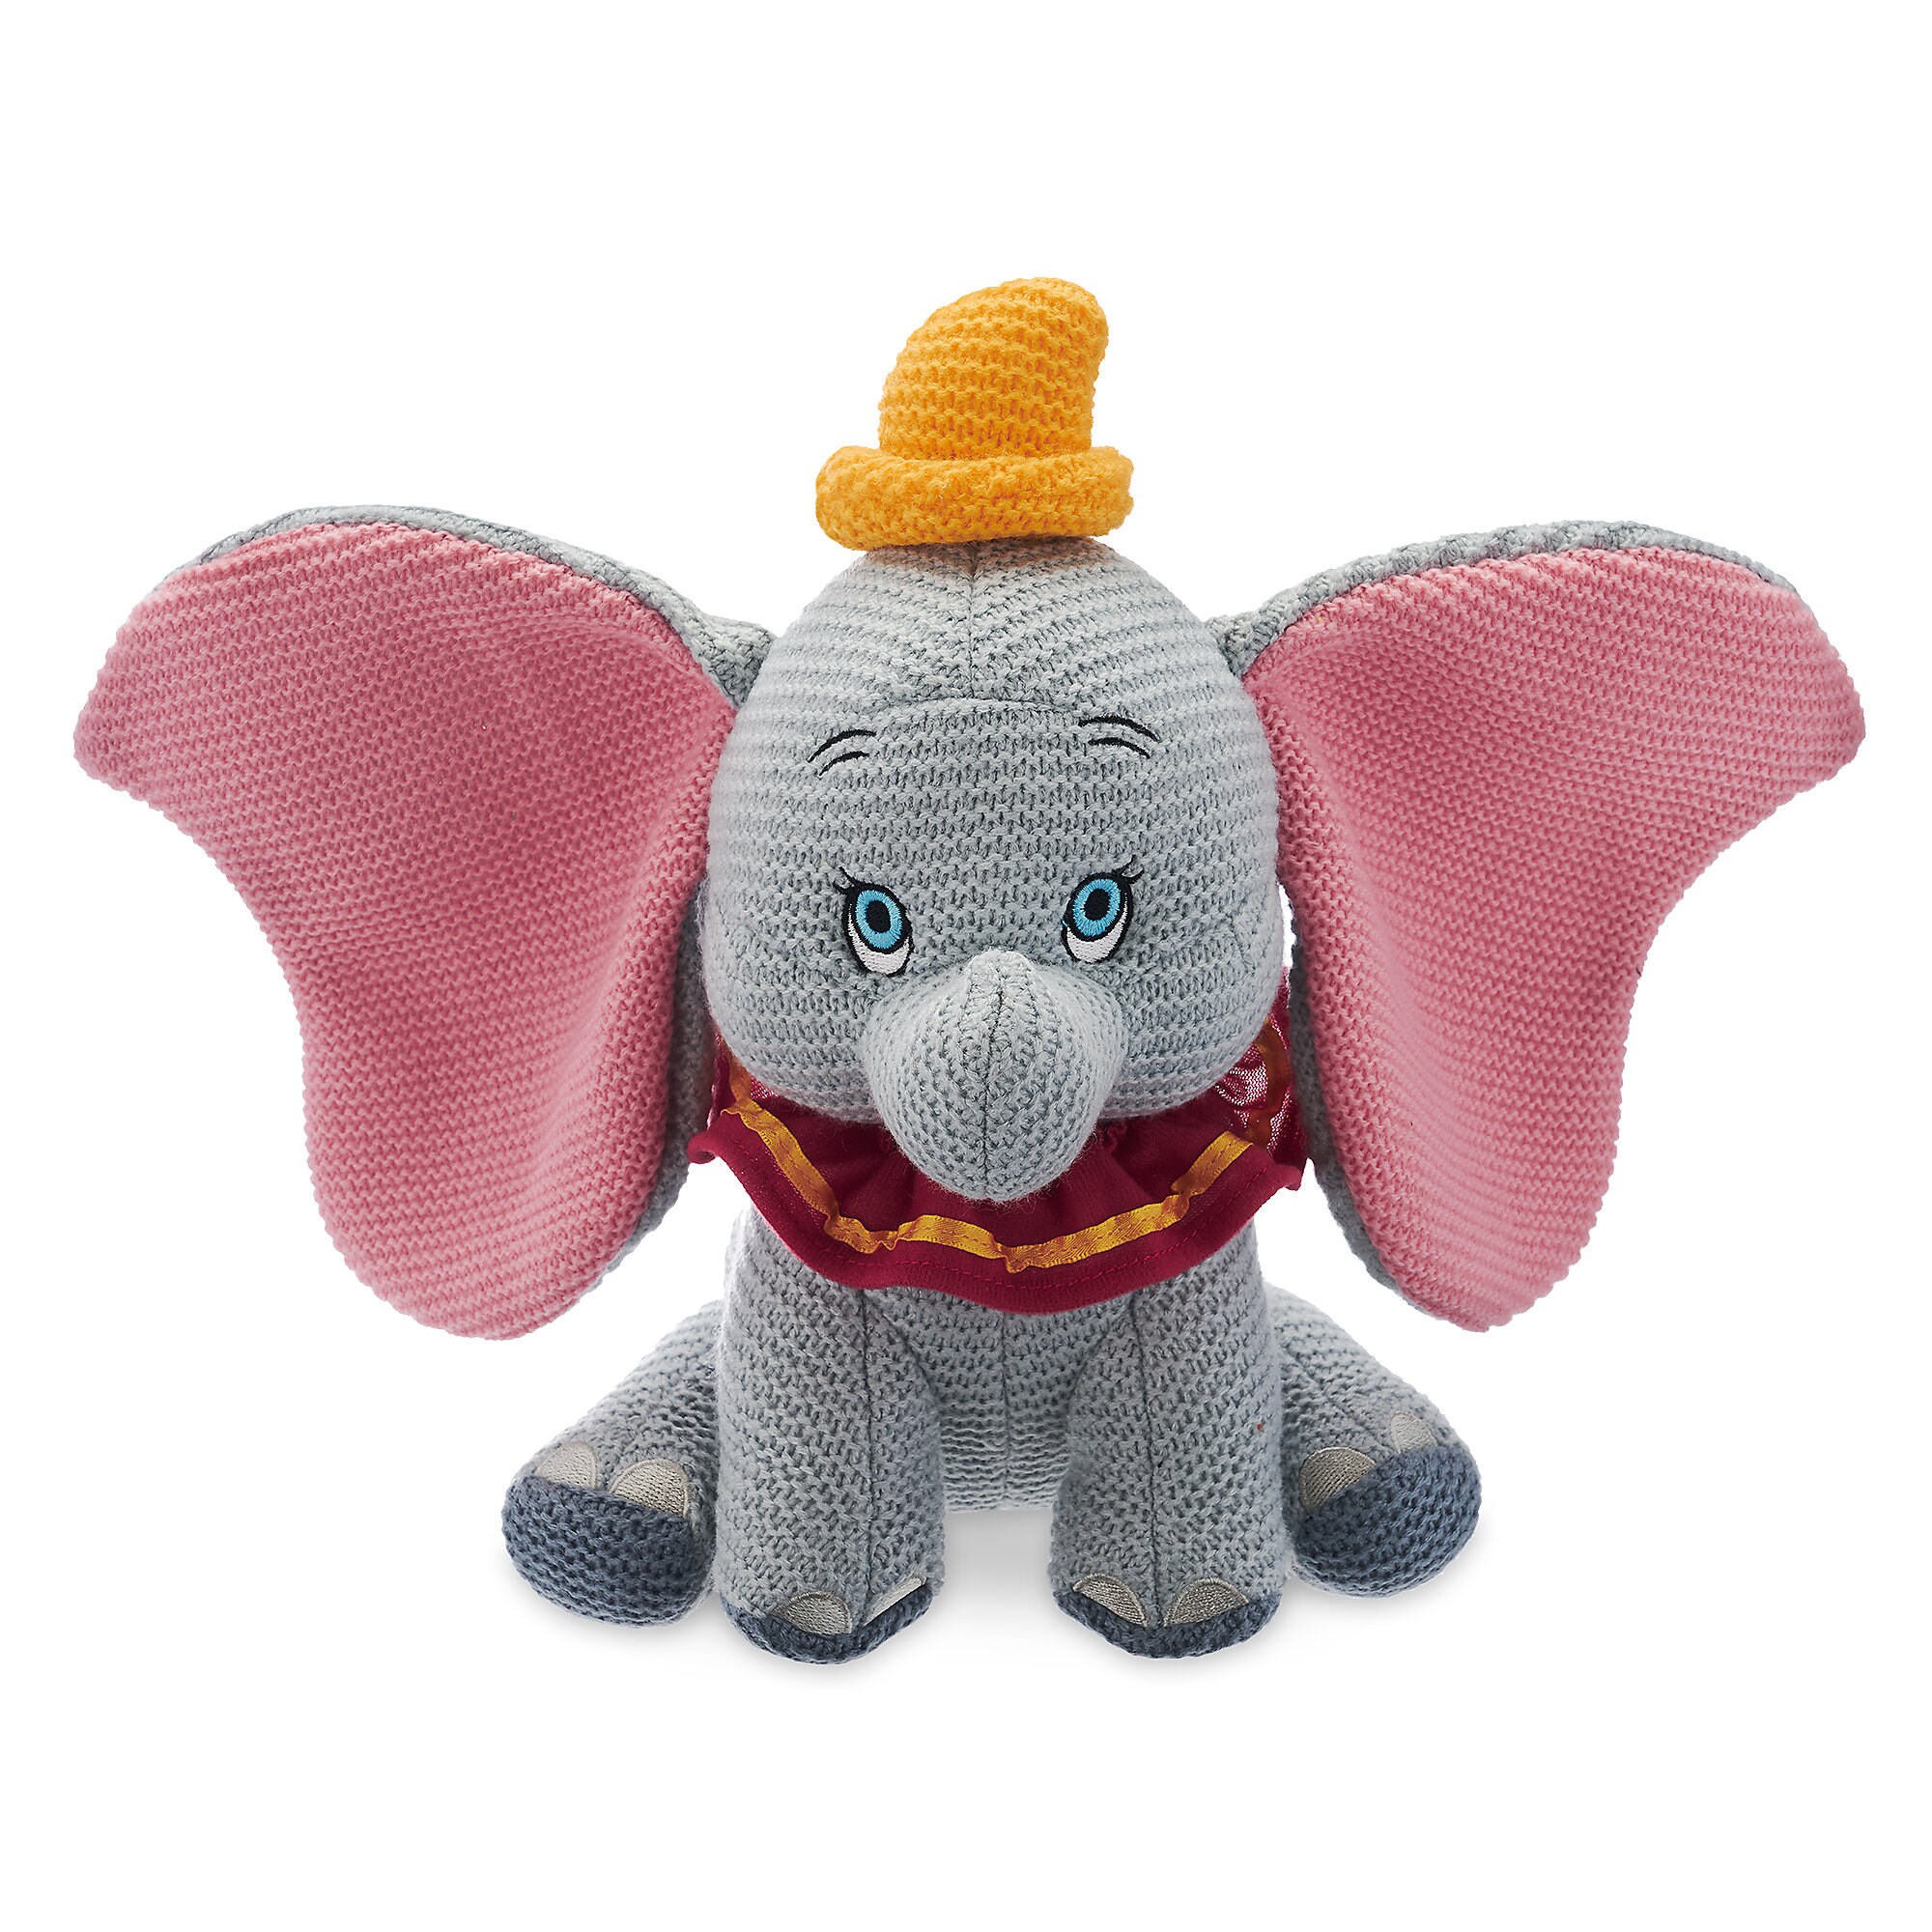 Dumbo Knit Plush - 11'' - Limited Release